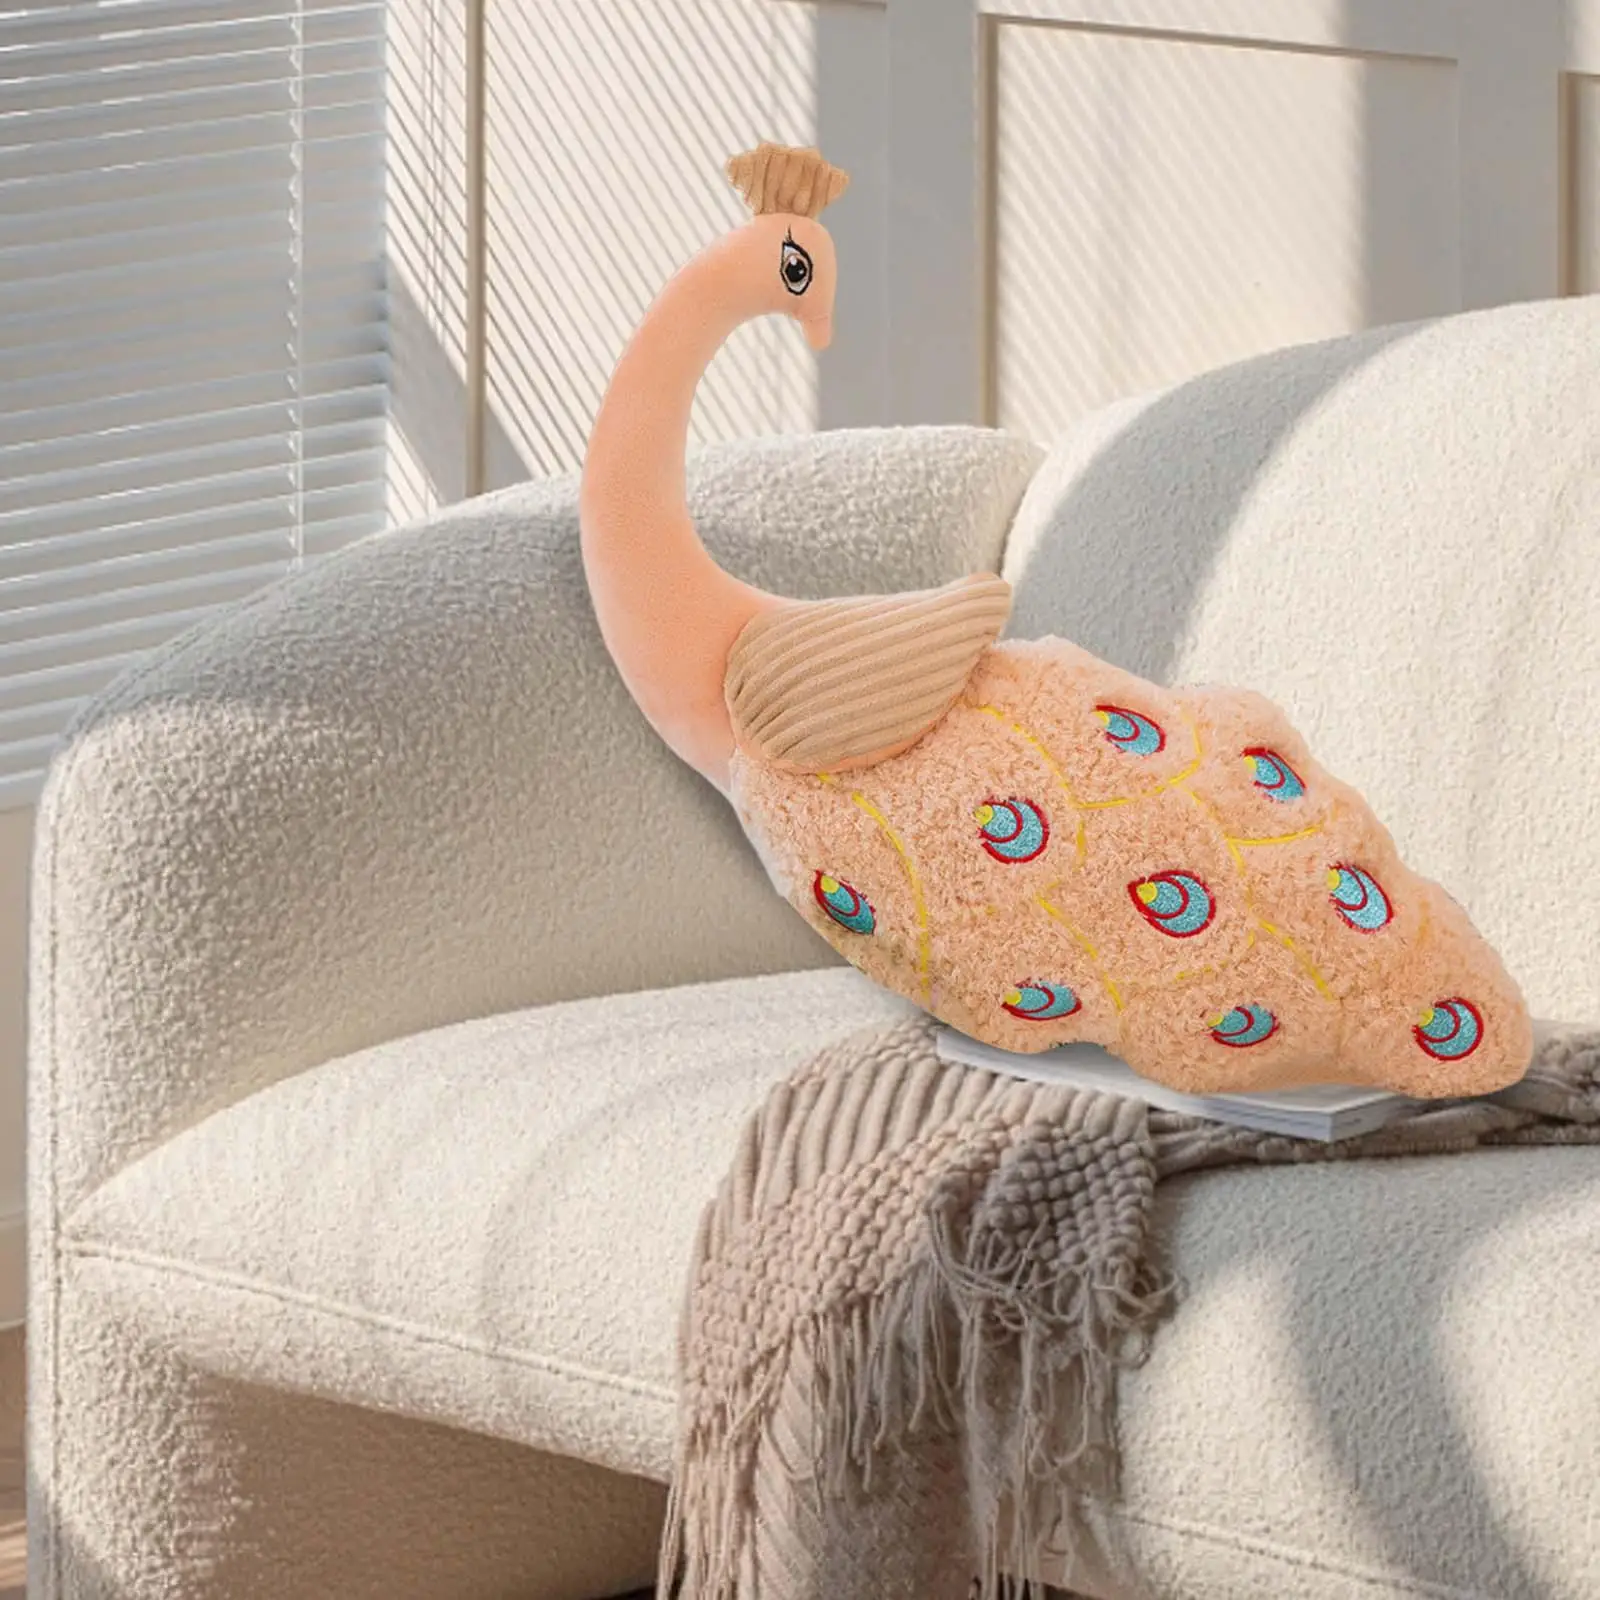 Peacock Decorative Pillow Bird Pillow Throw Pillow for Couch Bed Ornament Surface Washable Car Decoration Cute Multifunctional